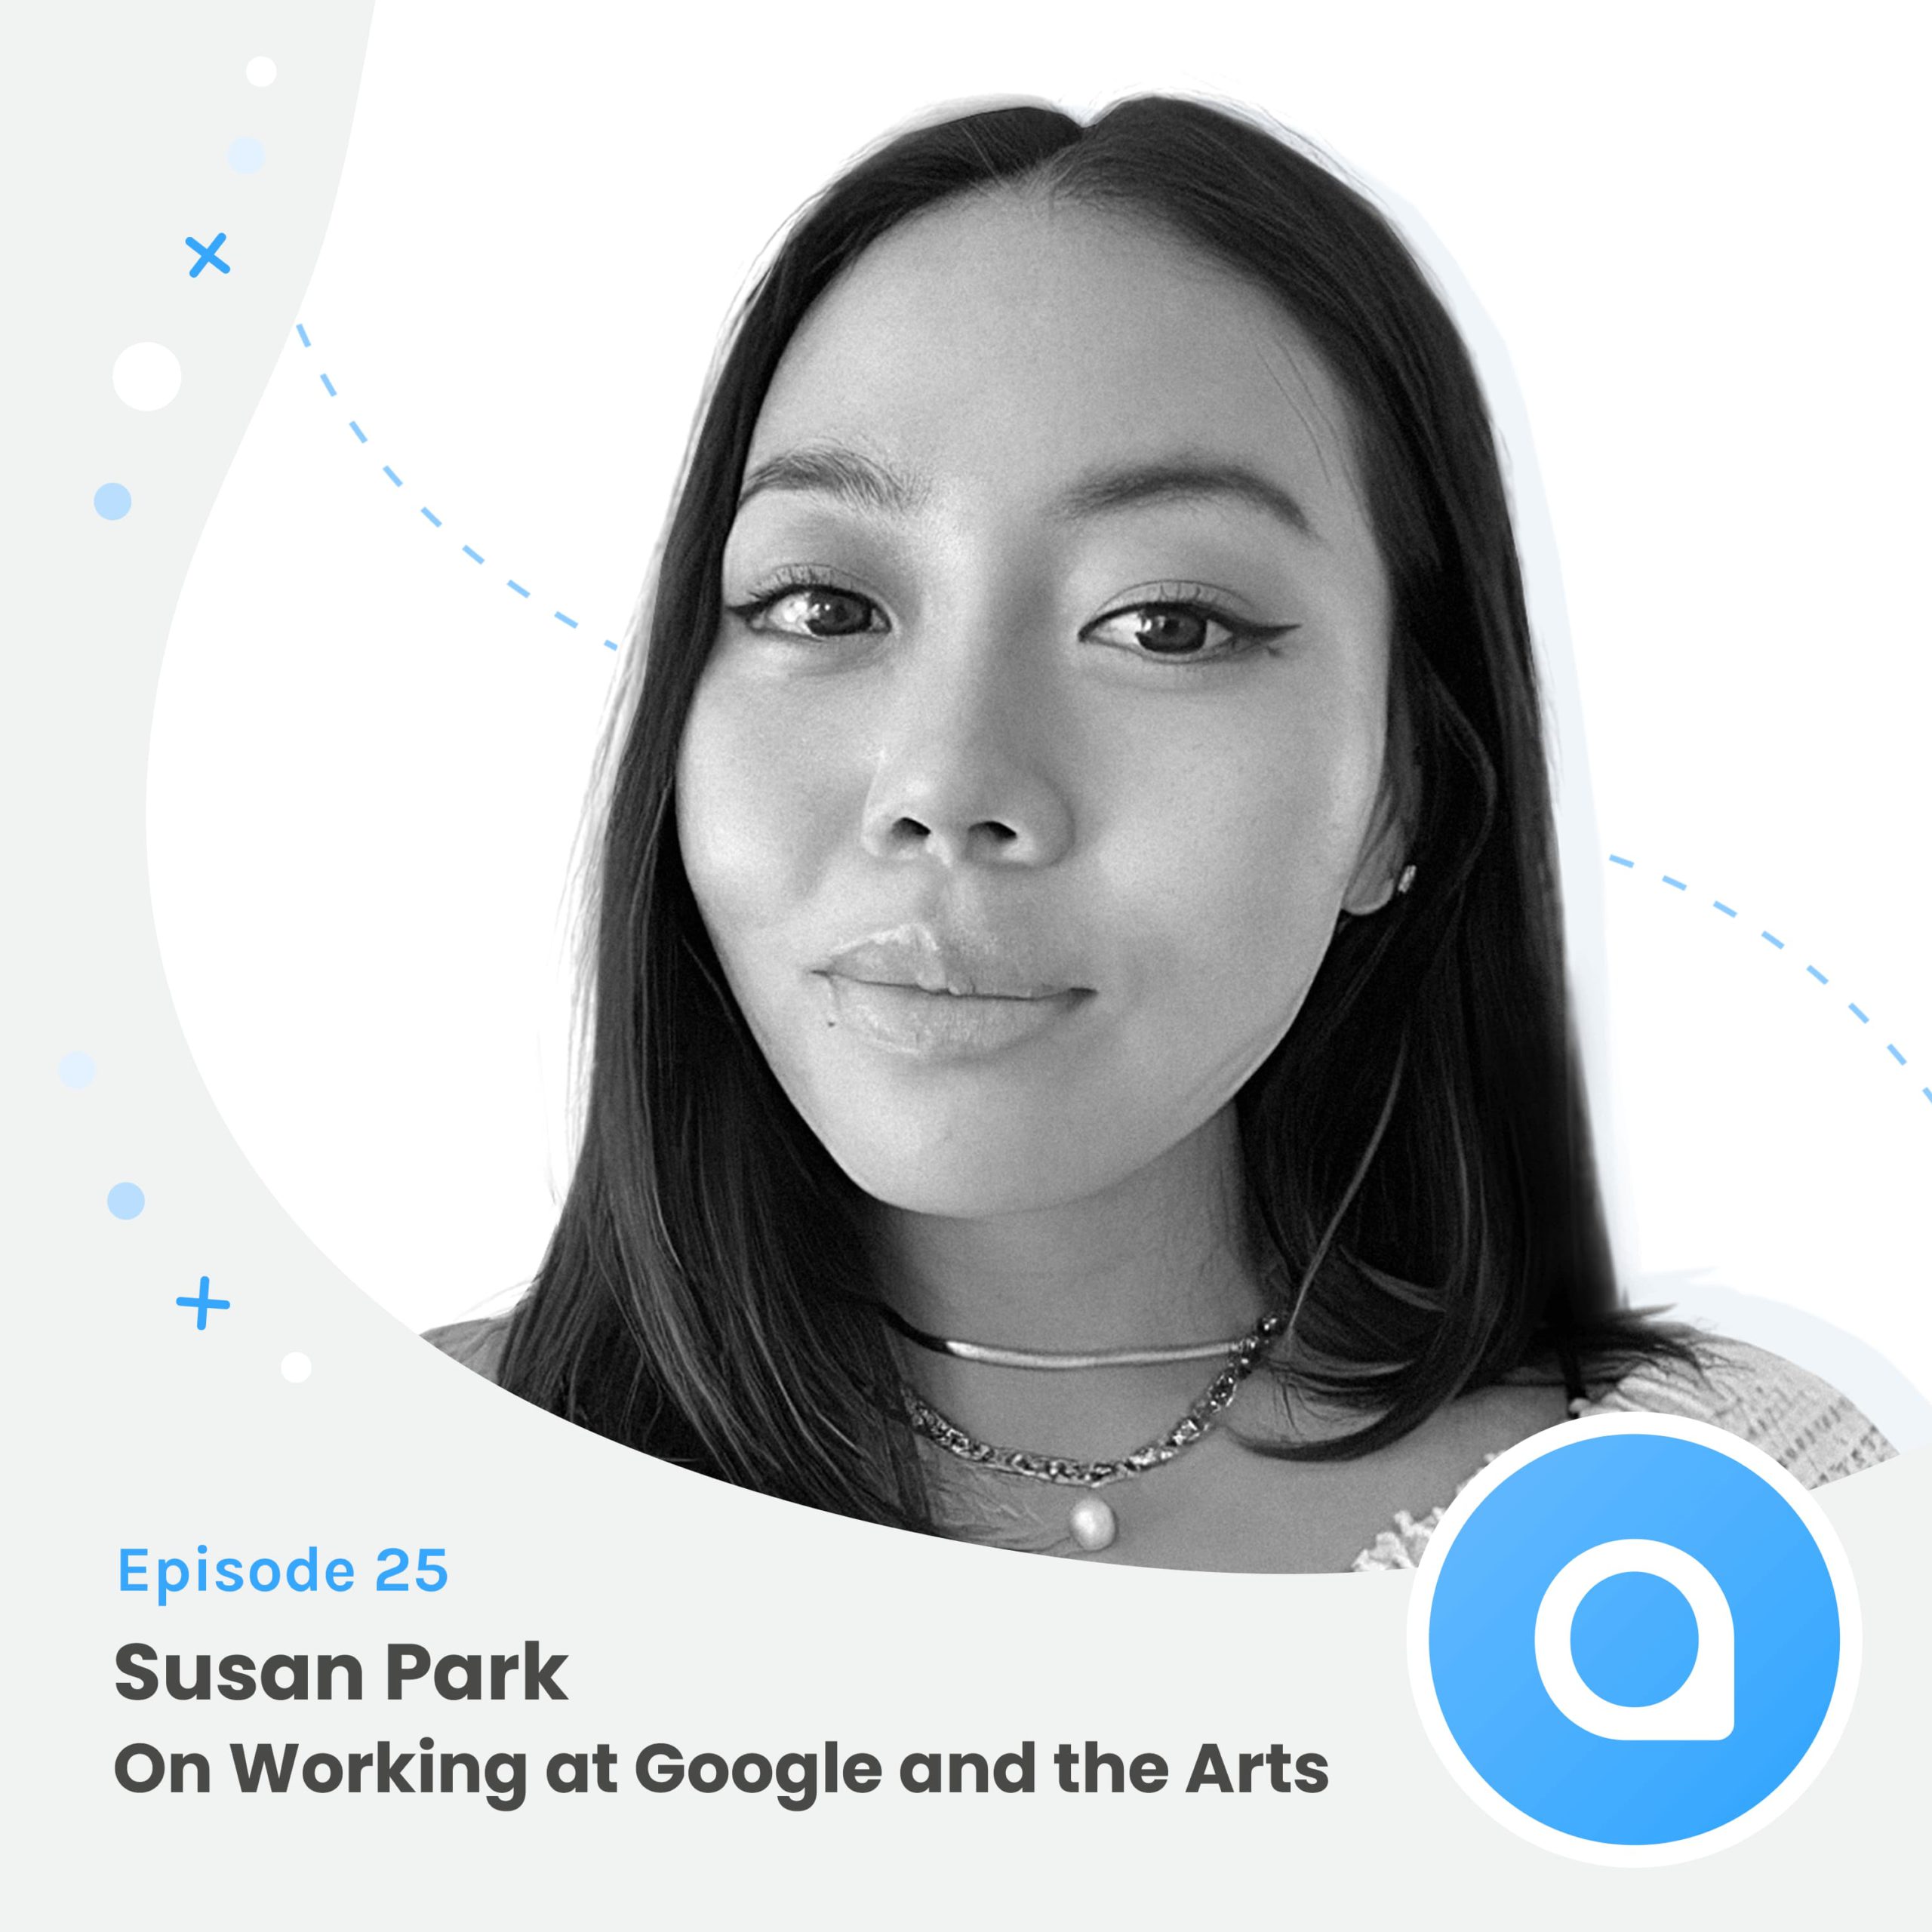 Susan Park: On Working at Google and the Arts